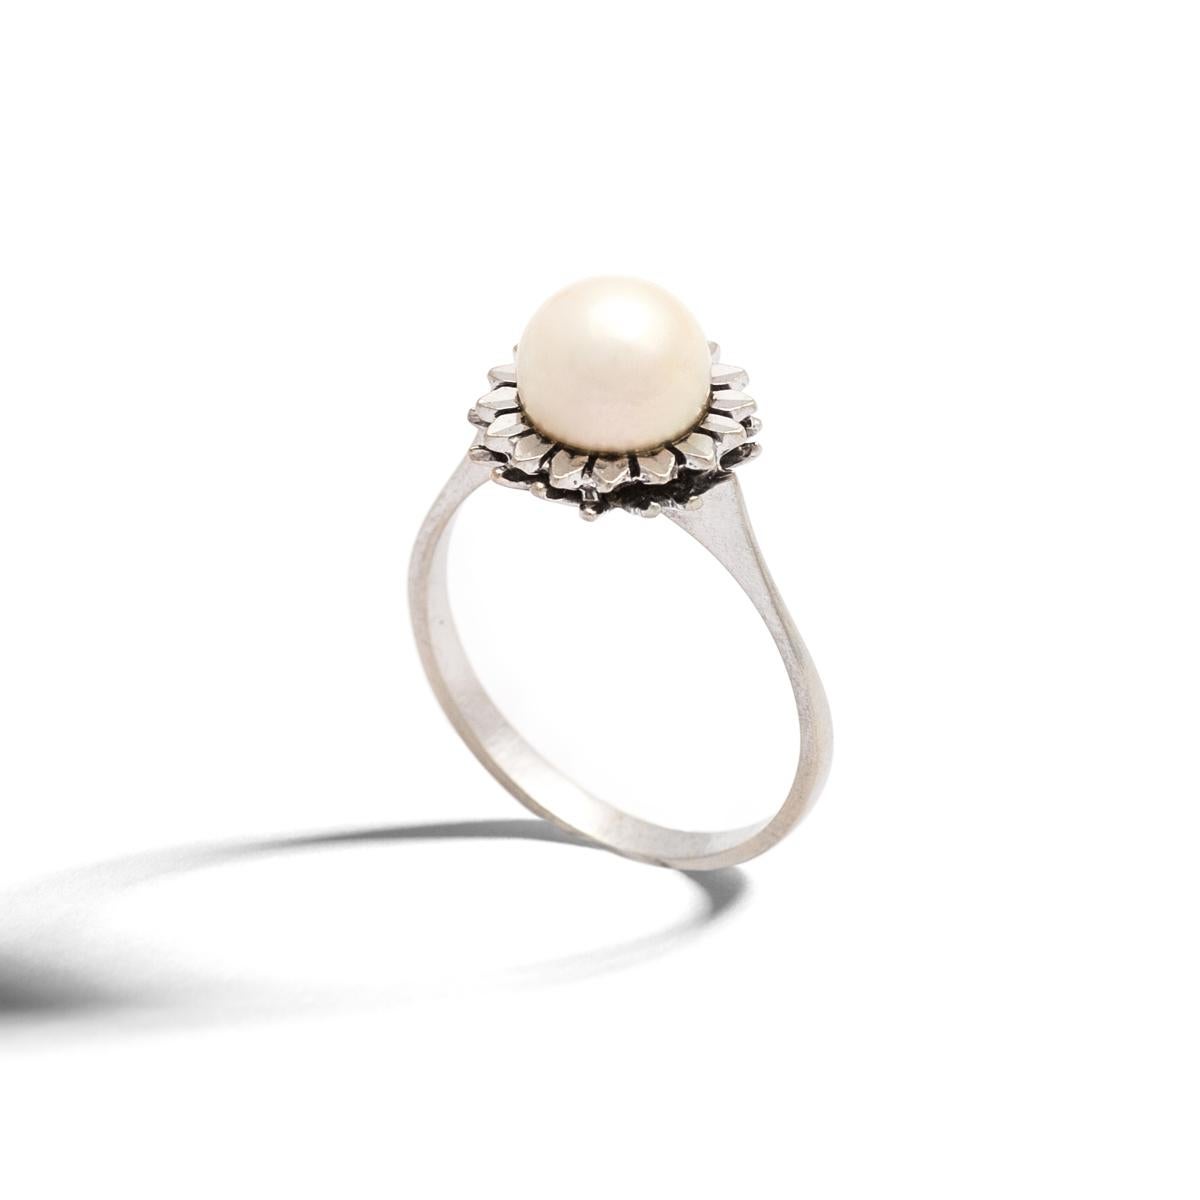 Pearl white gold Ring representing a stylized flower.
Pearl diameter: 7.50 millimeters.
Ring size: 6 1/2.
Gross weight: 3.07 grams.
